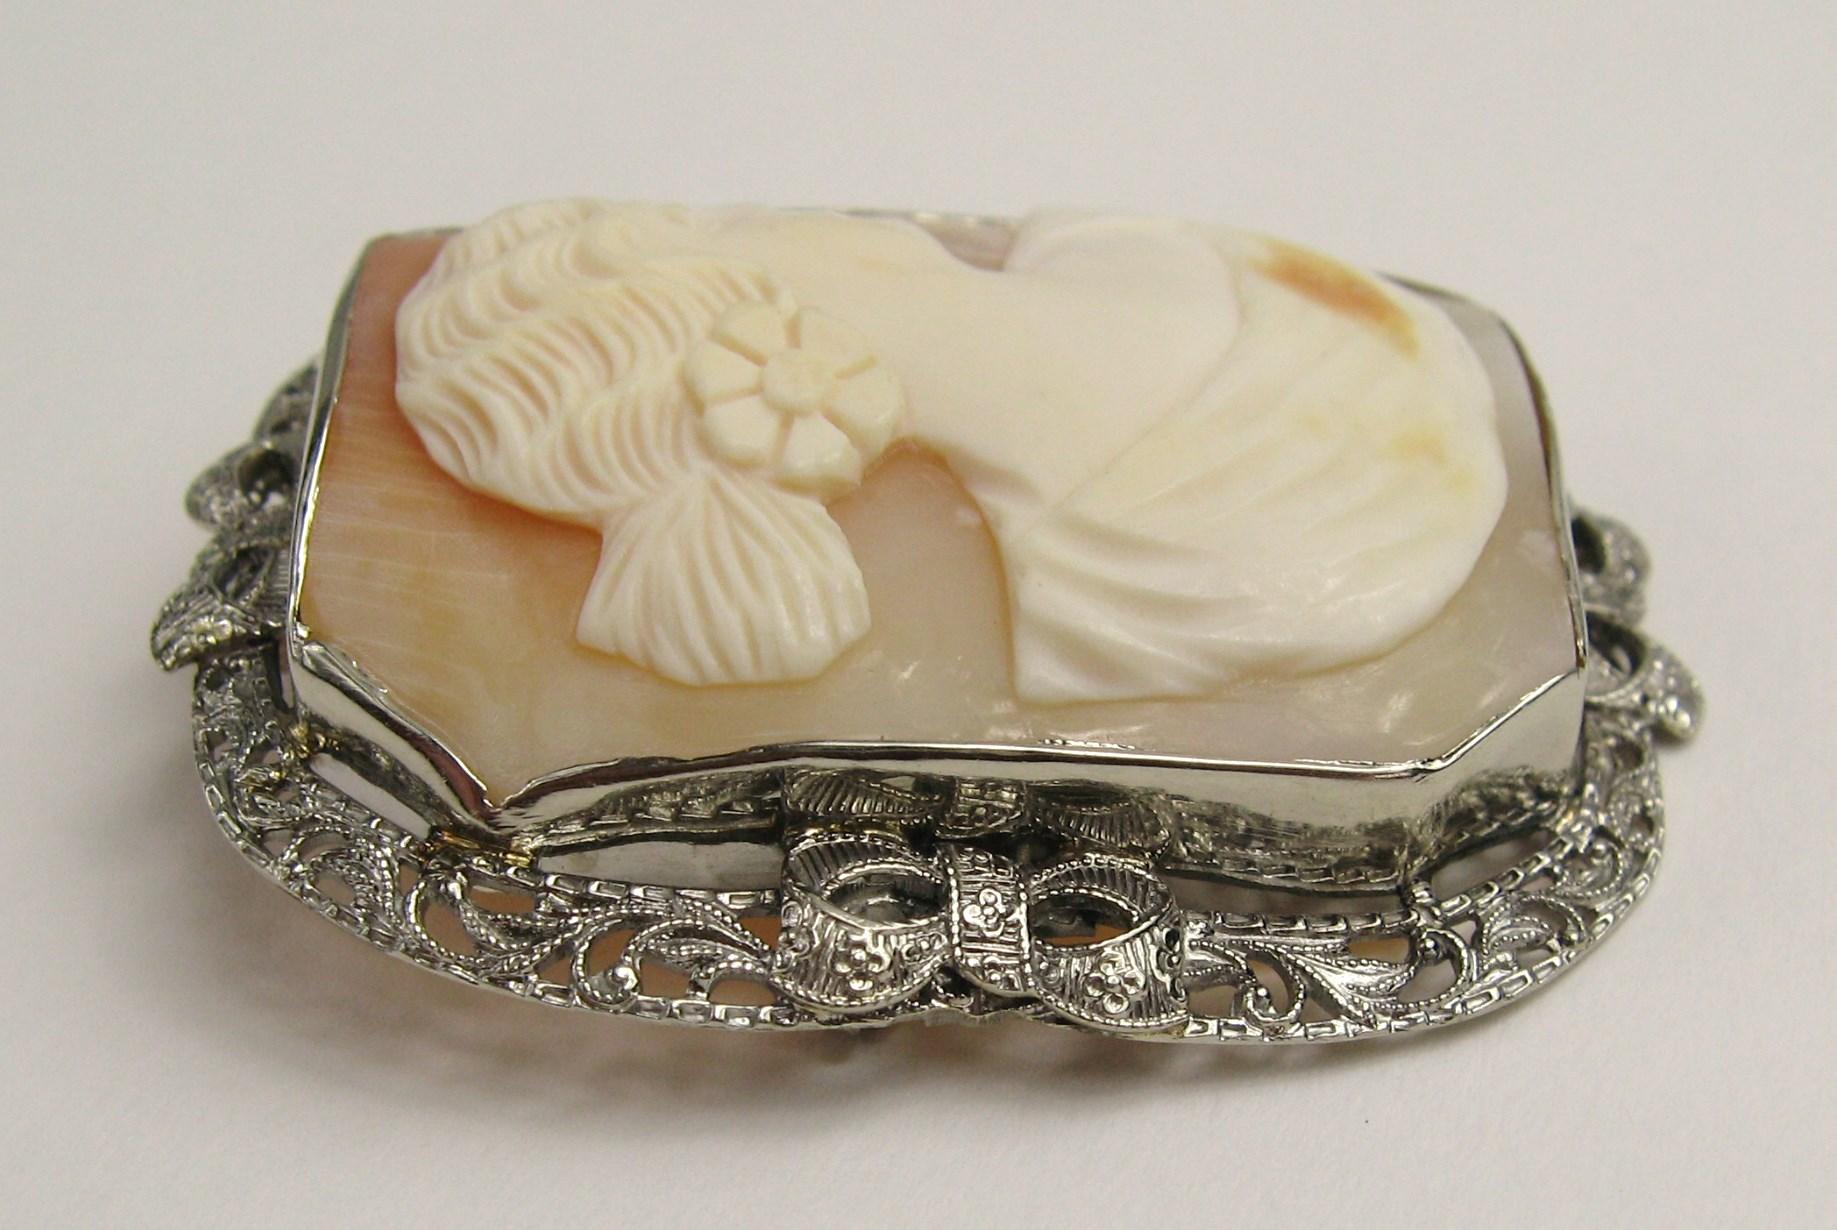 Antique Shell Cameo White Gold Brooch Pendant Bows In Good Condition For Sale In Wallkill, NY